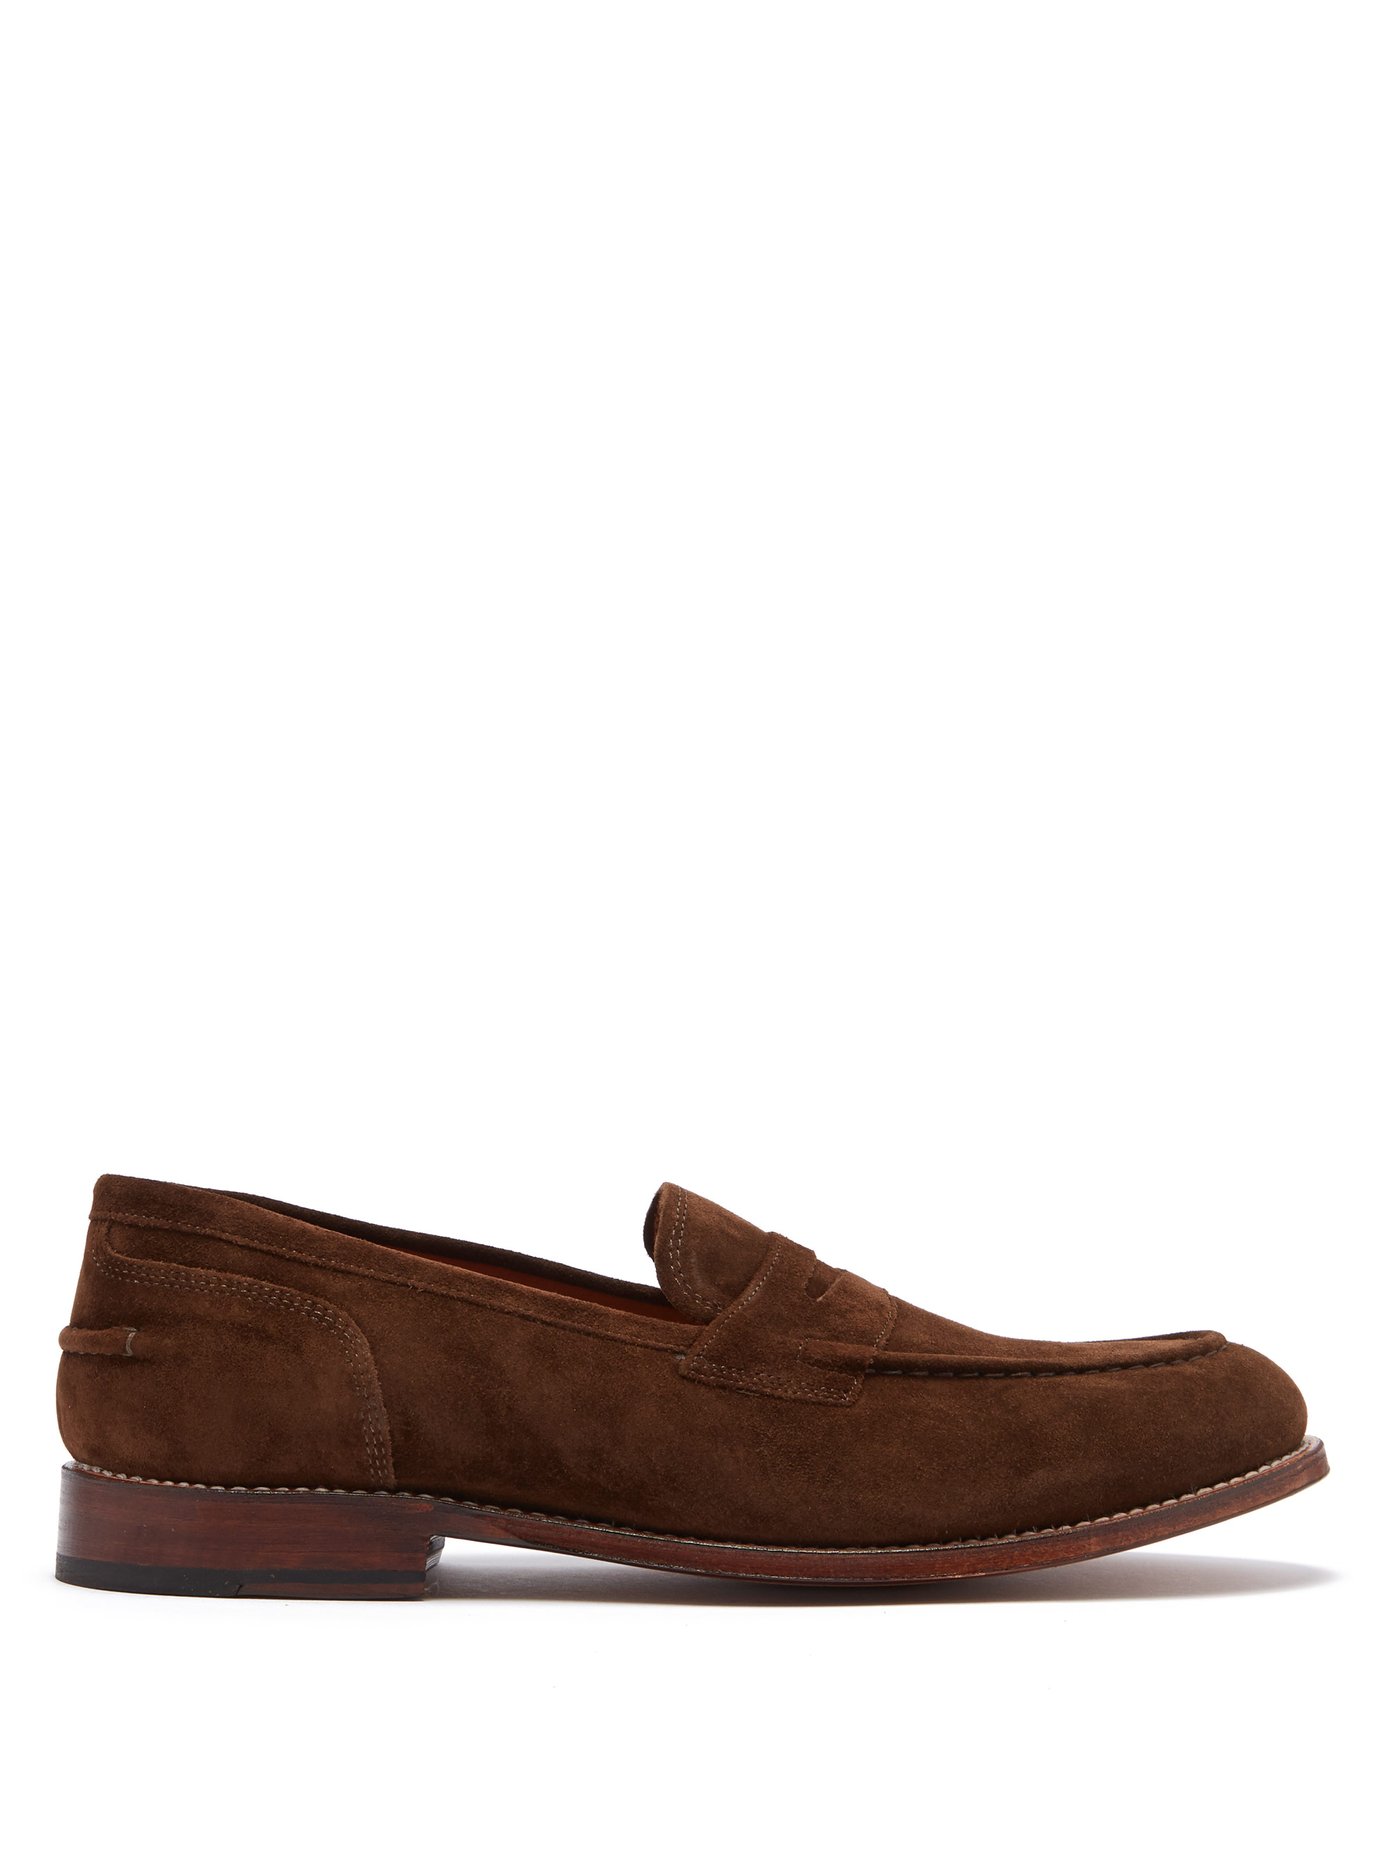 Maxwell suede loafers | Grenson 